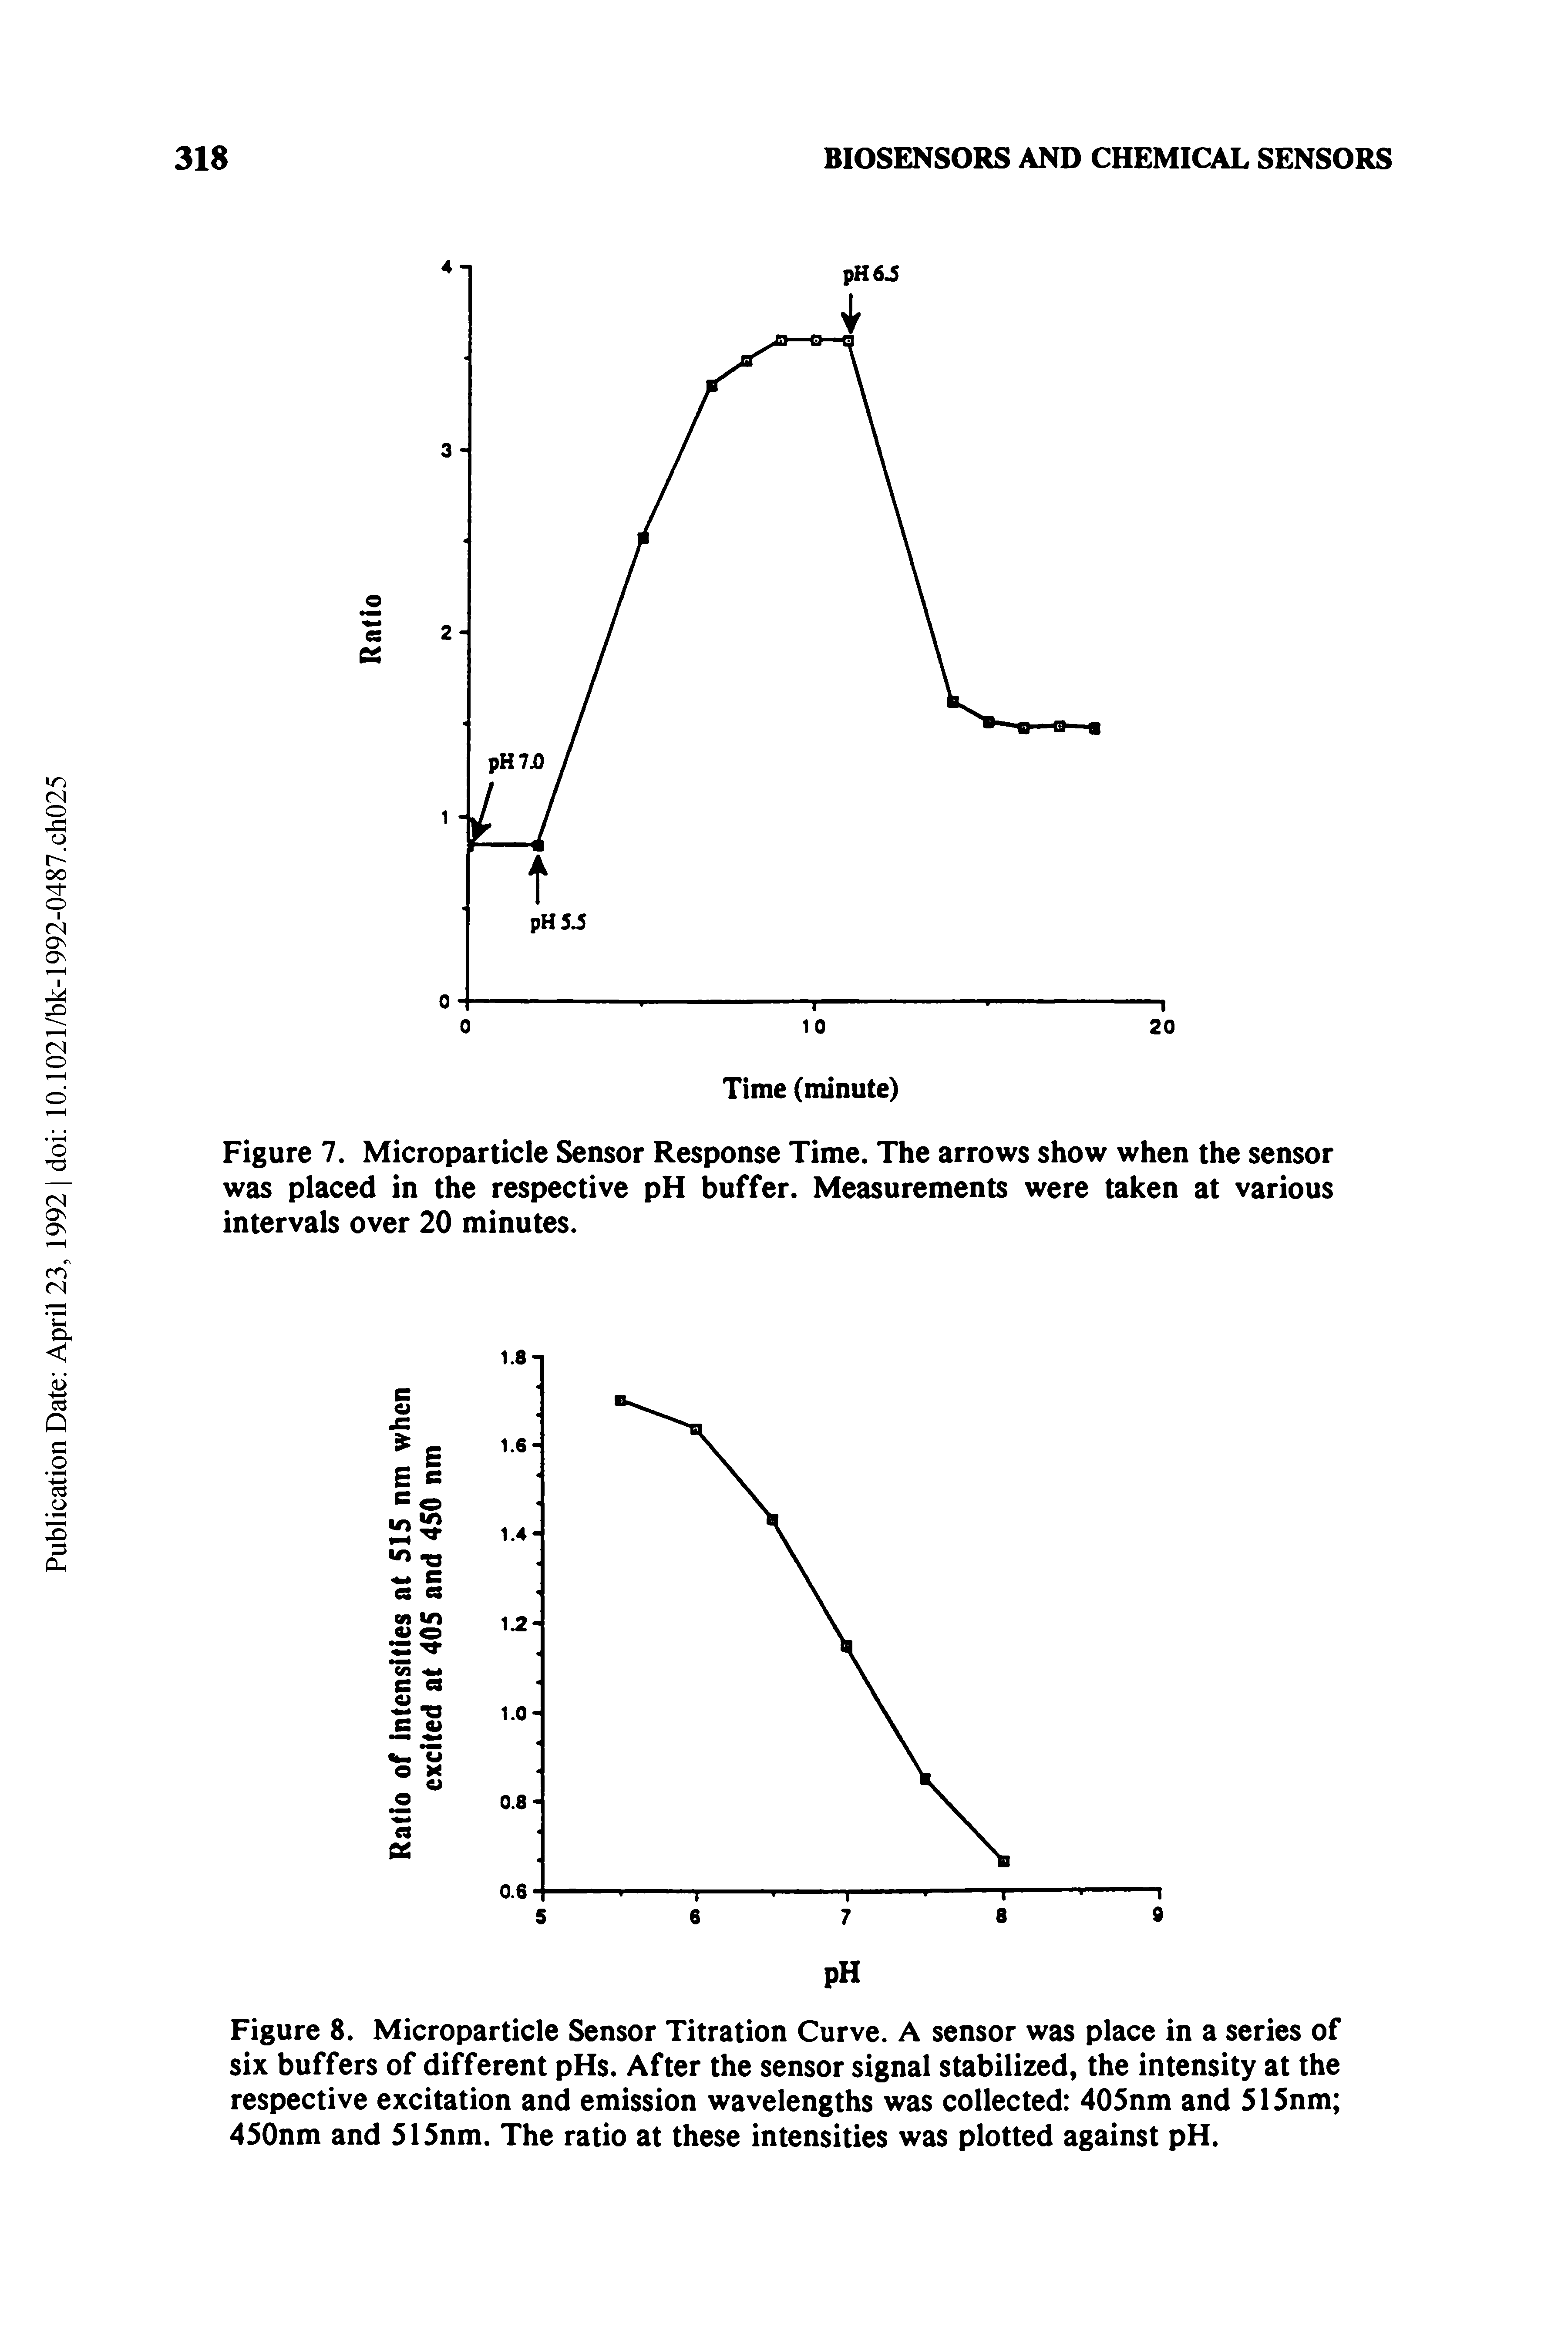 Figure 8. Microparticle Sensor Titration Curve. A sensor was place in a series of six buffers of different pHs. After the sensor signal stabilized, the intensity at the respective excitation and emission wavelengths was collected 405nm and 515nm 450nm and 515nm. The ratio at these intensities was plotted against pH.